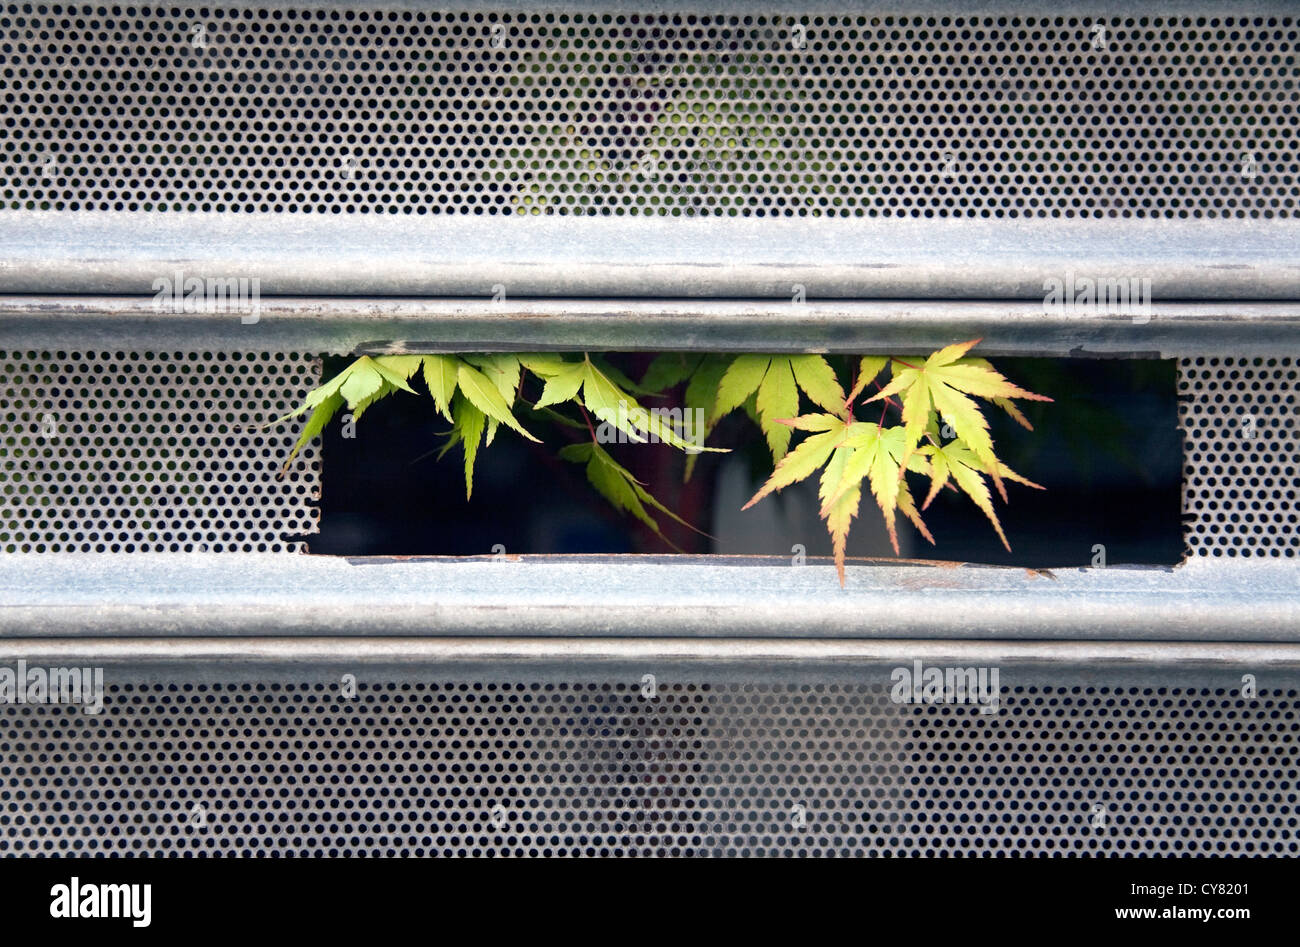 Plant Growing Through Mail Slot Stock Photo